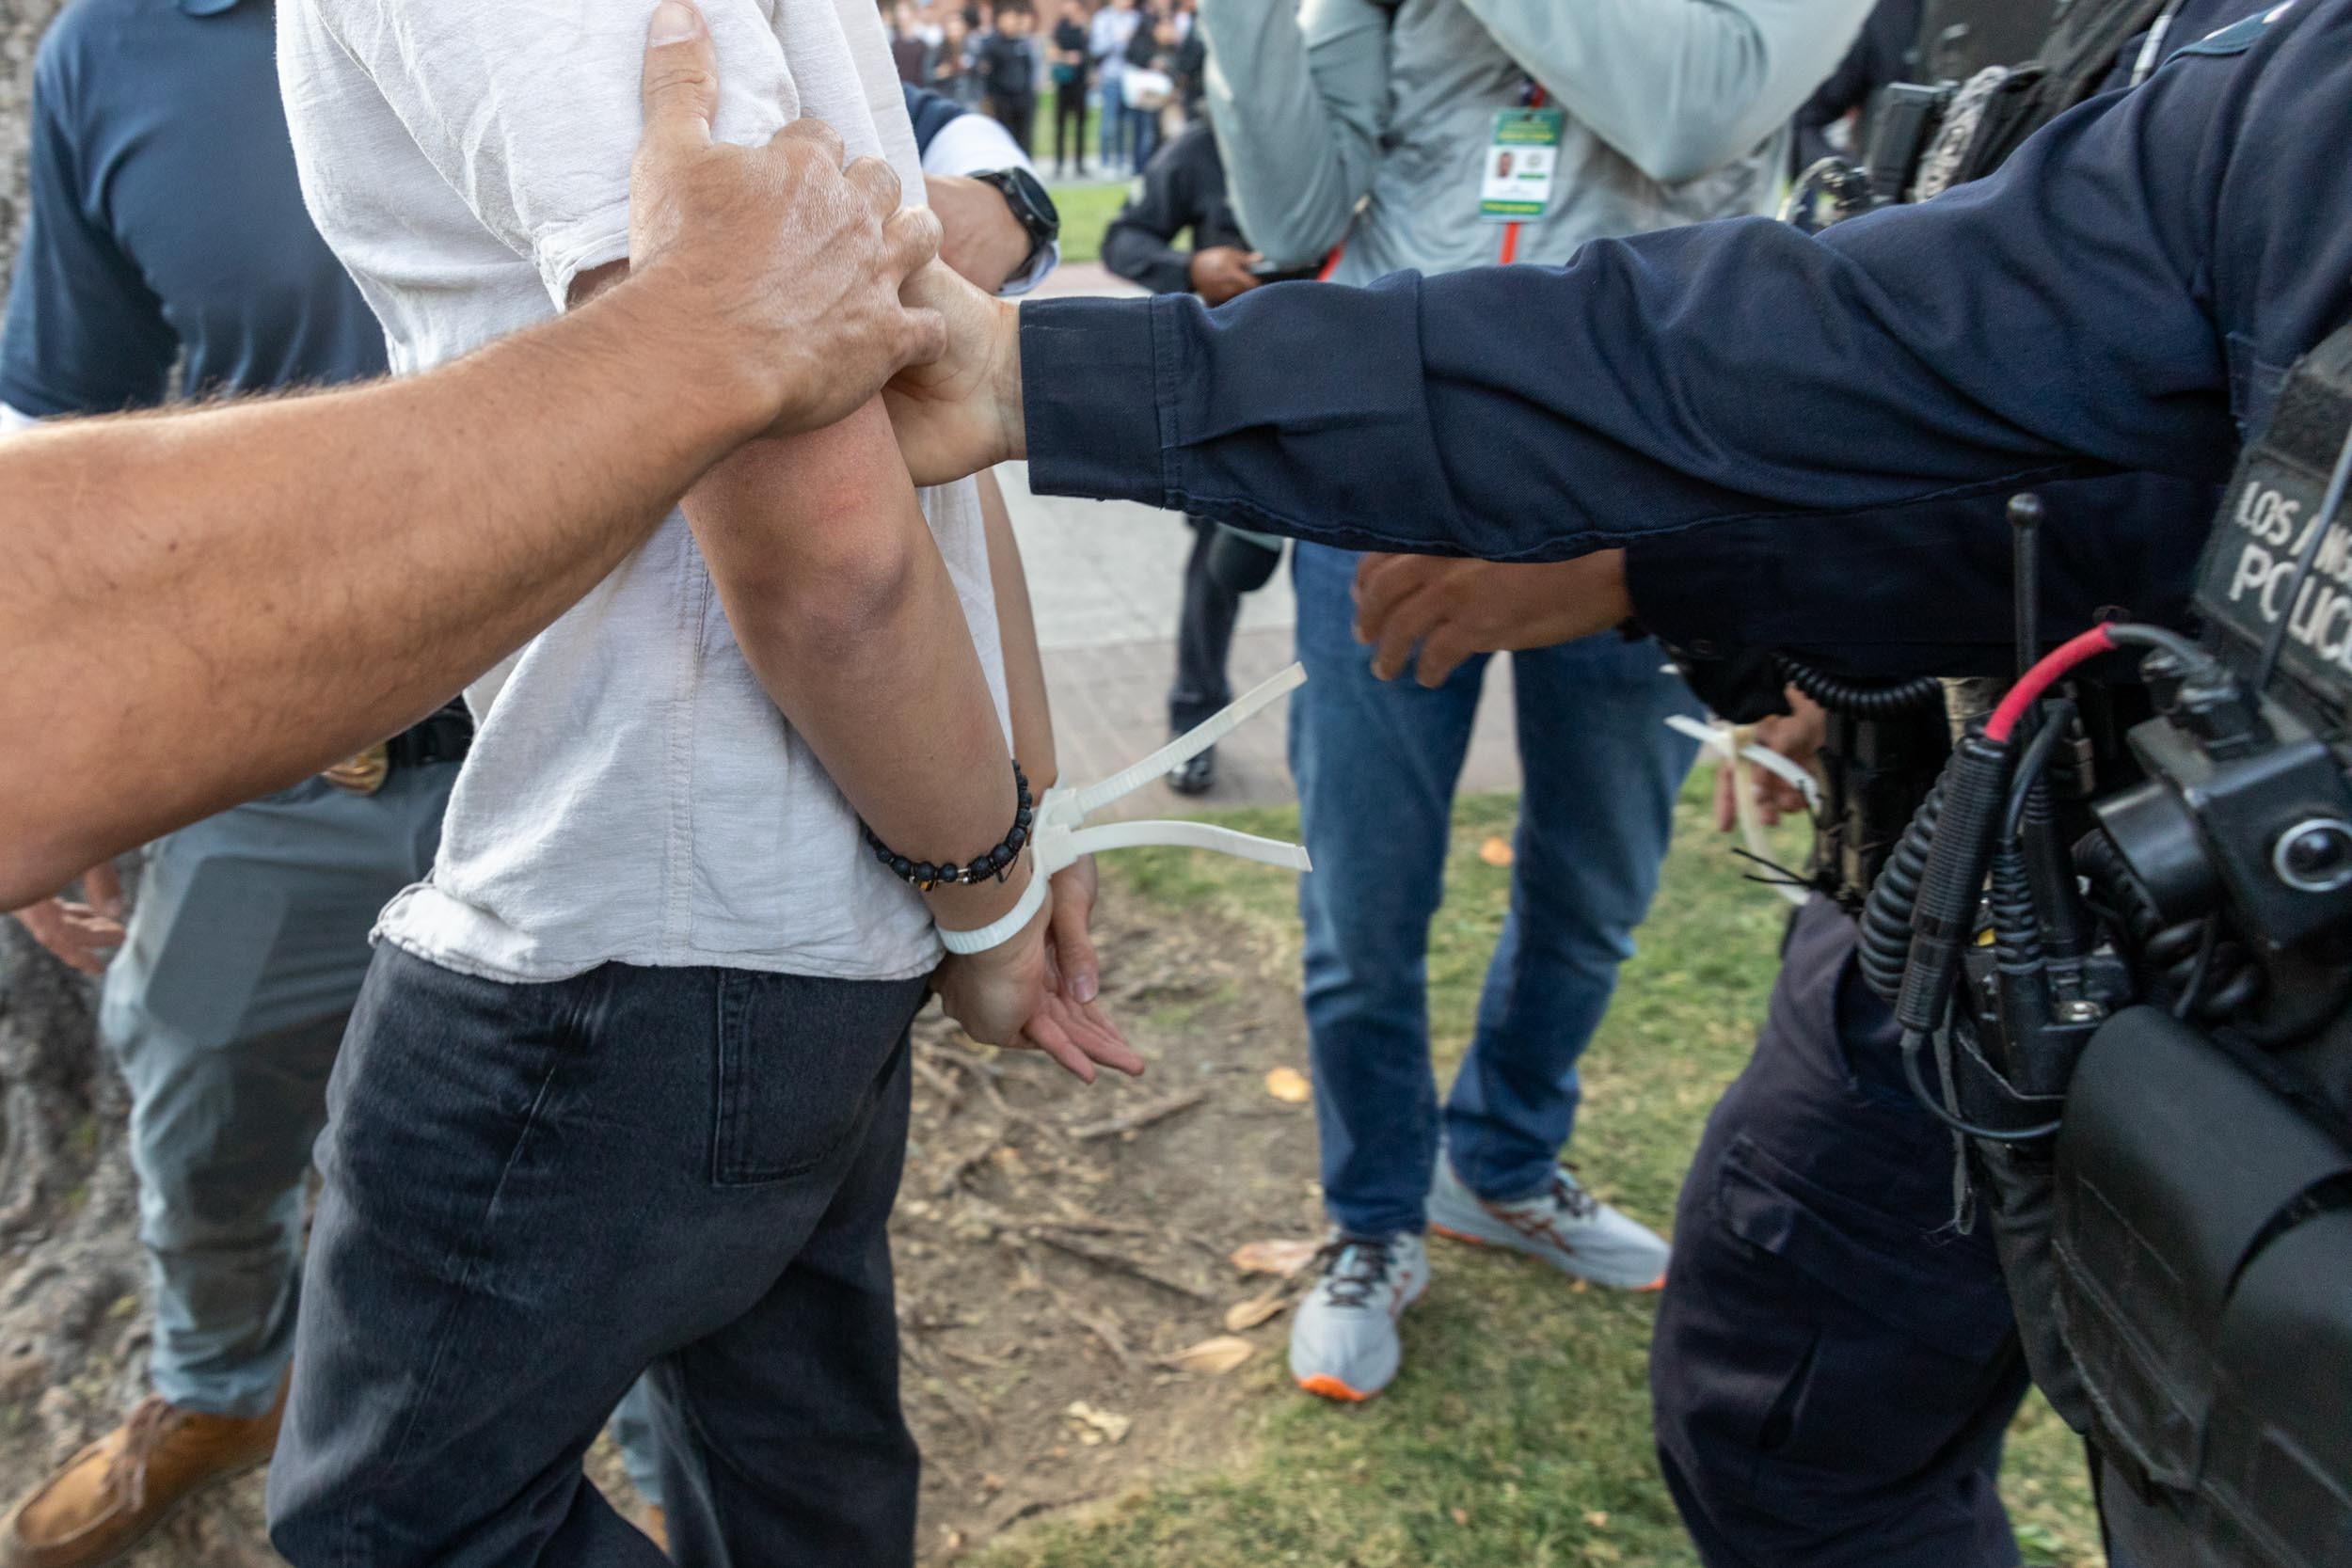 Members of law enforcement and police officers intervene during a pro-Palestinian student protest at University of Southern California in Los Angeles, California, on April 24.